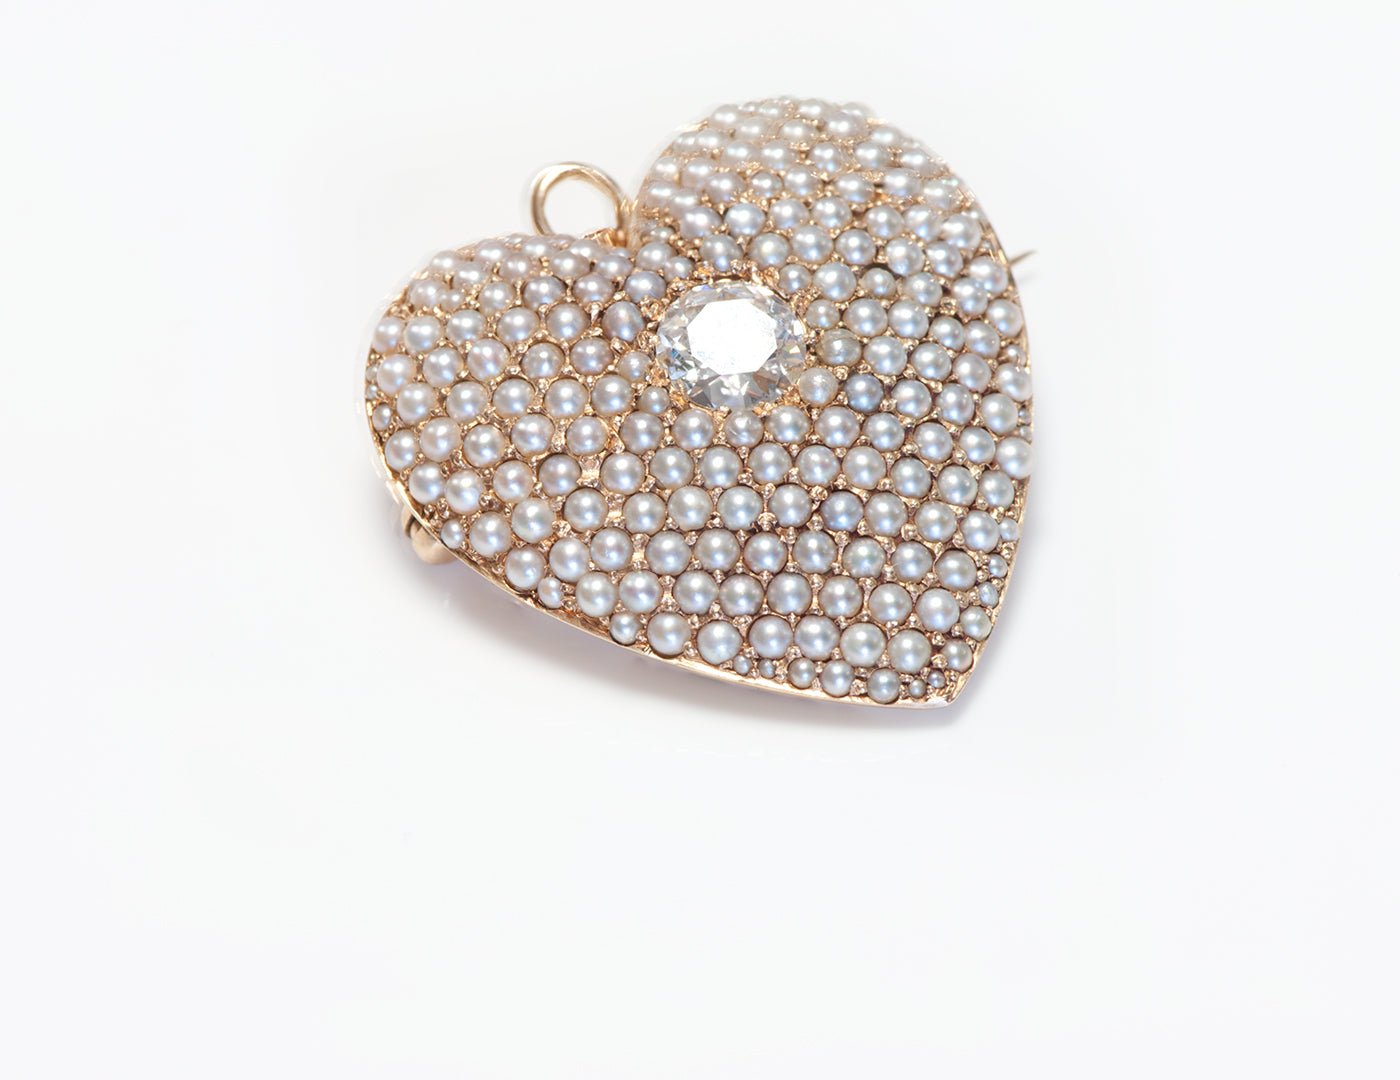 Antique Edwardian Gold Diamond Seed Pearl Heart Pendant Brooch - DSF Antique Jewelry